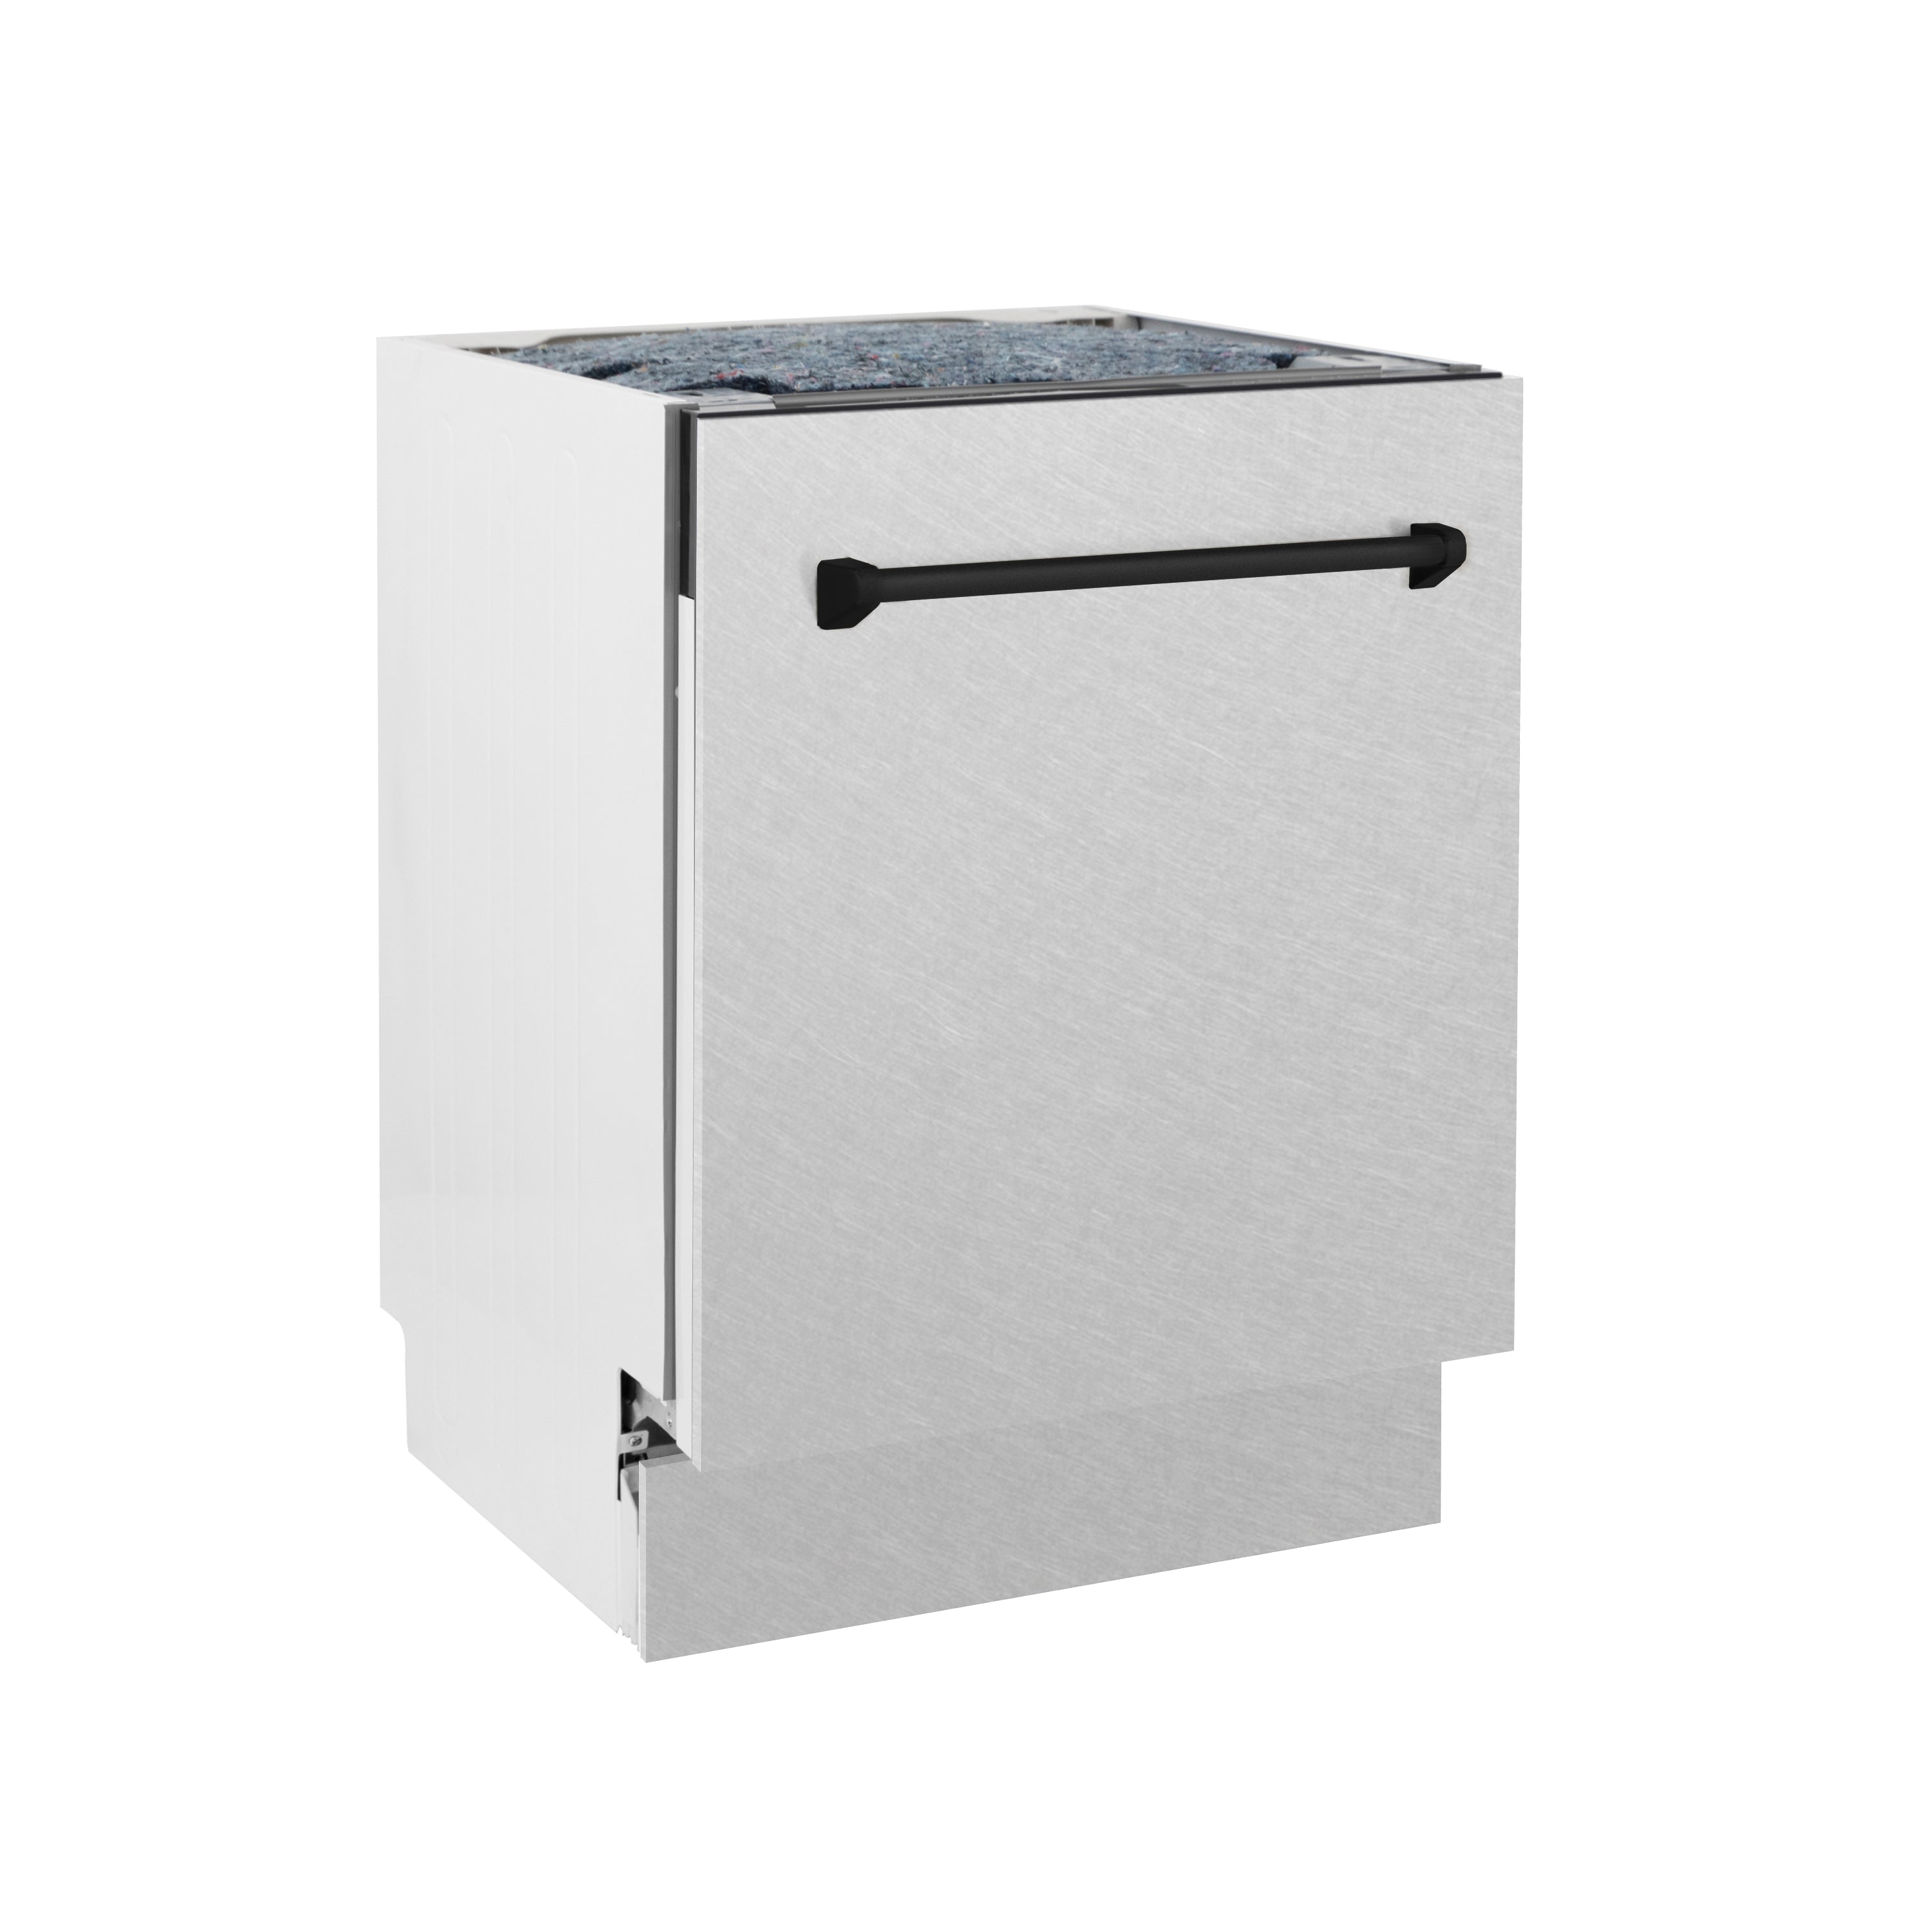 ZLINE Autograph Edition 24" 3rd Rack Top Control Tall Tub Dishwasher in Fingerprint Resistant Stainless Steel with Handle, 51dBa (DWVZ-SN-24-MB)